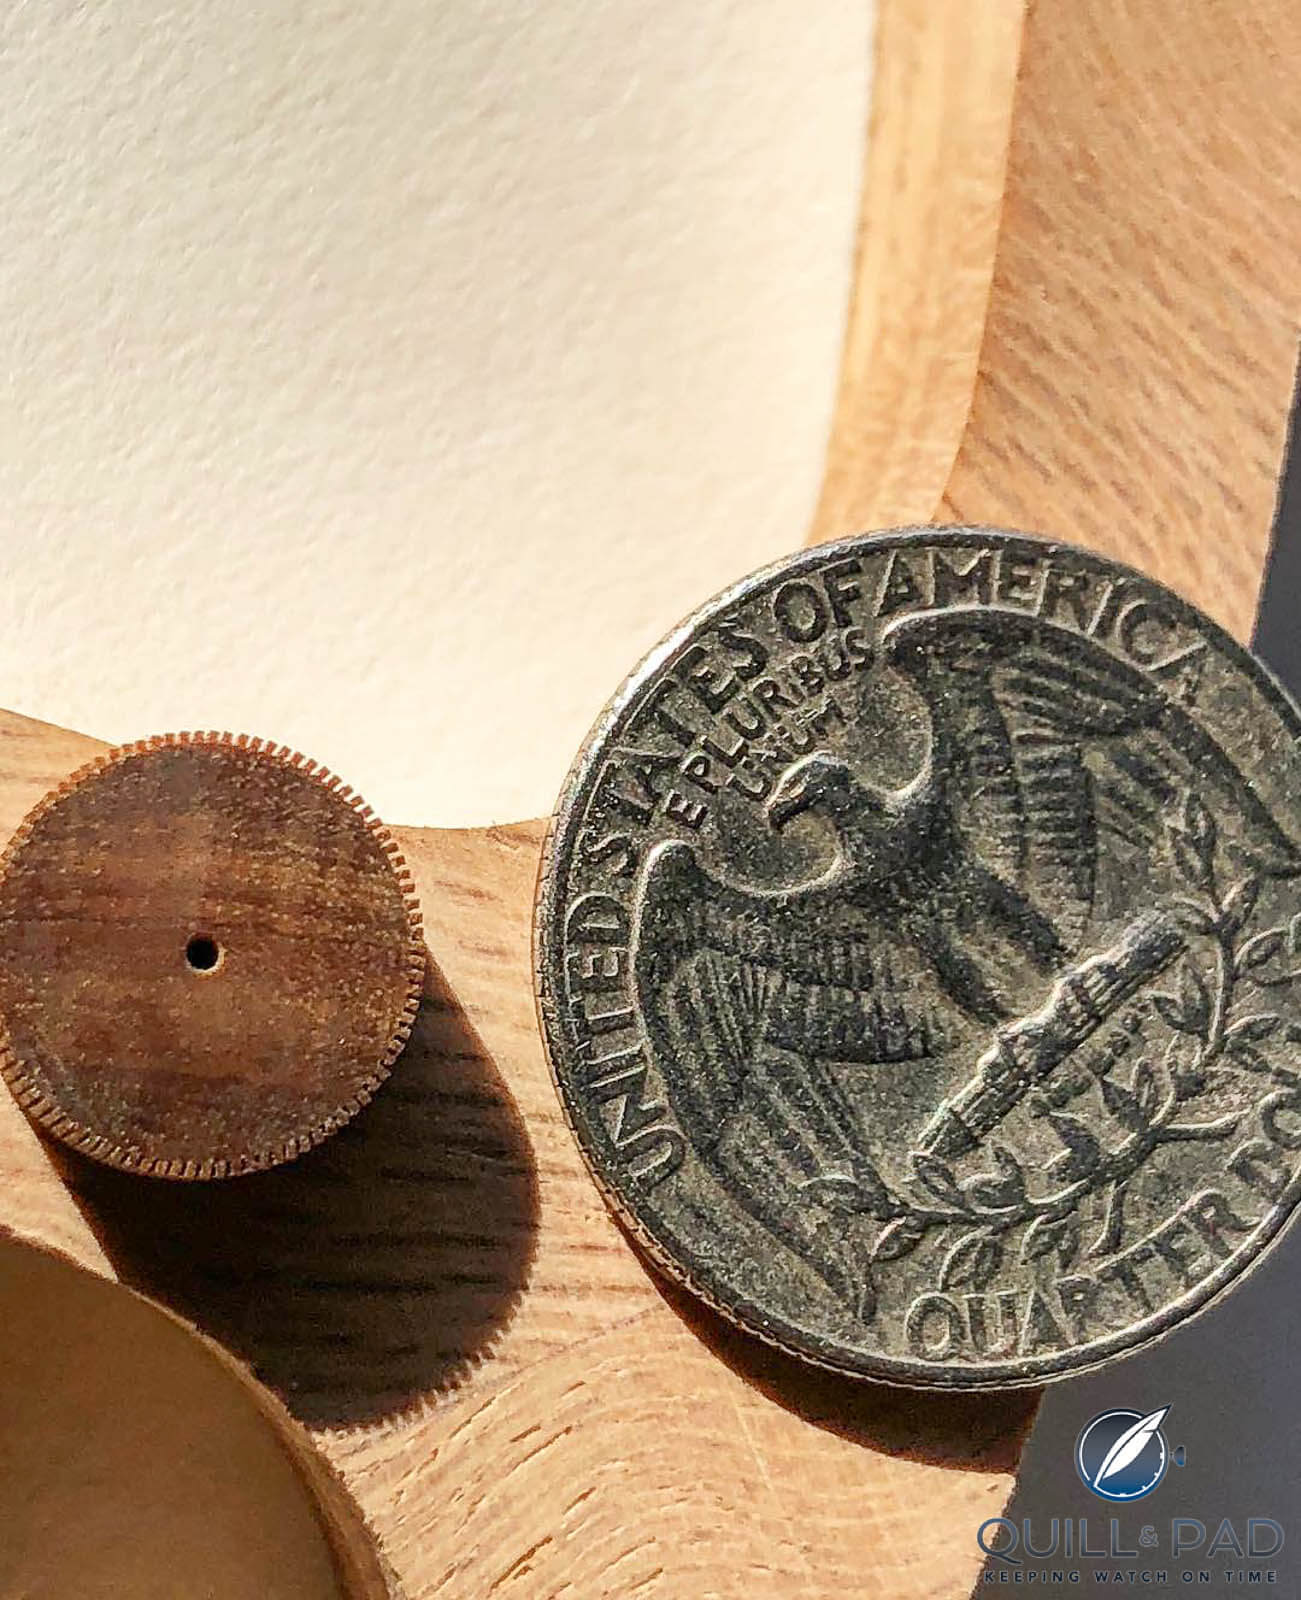 Rick Hale's smallest wood gear to date compered top a quarter coin